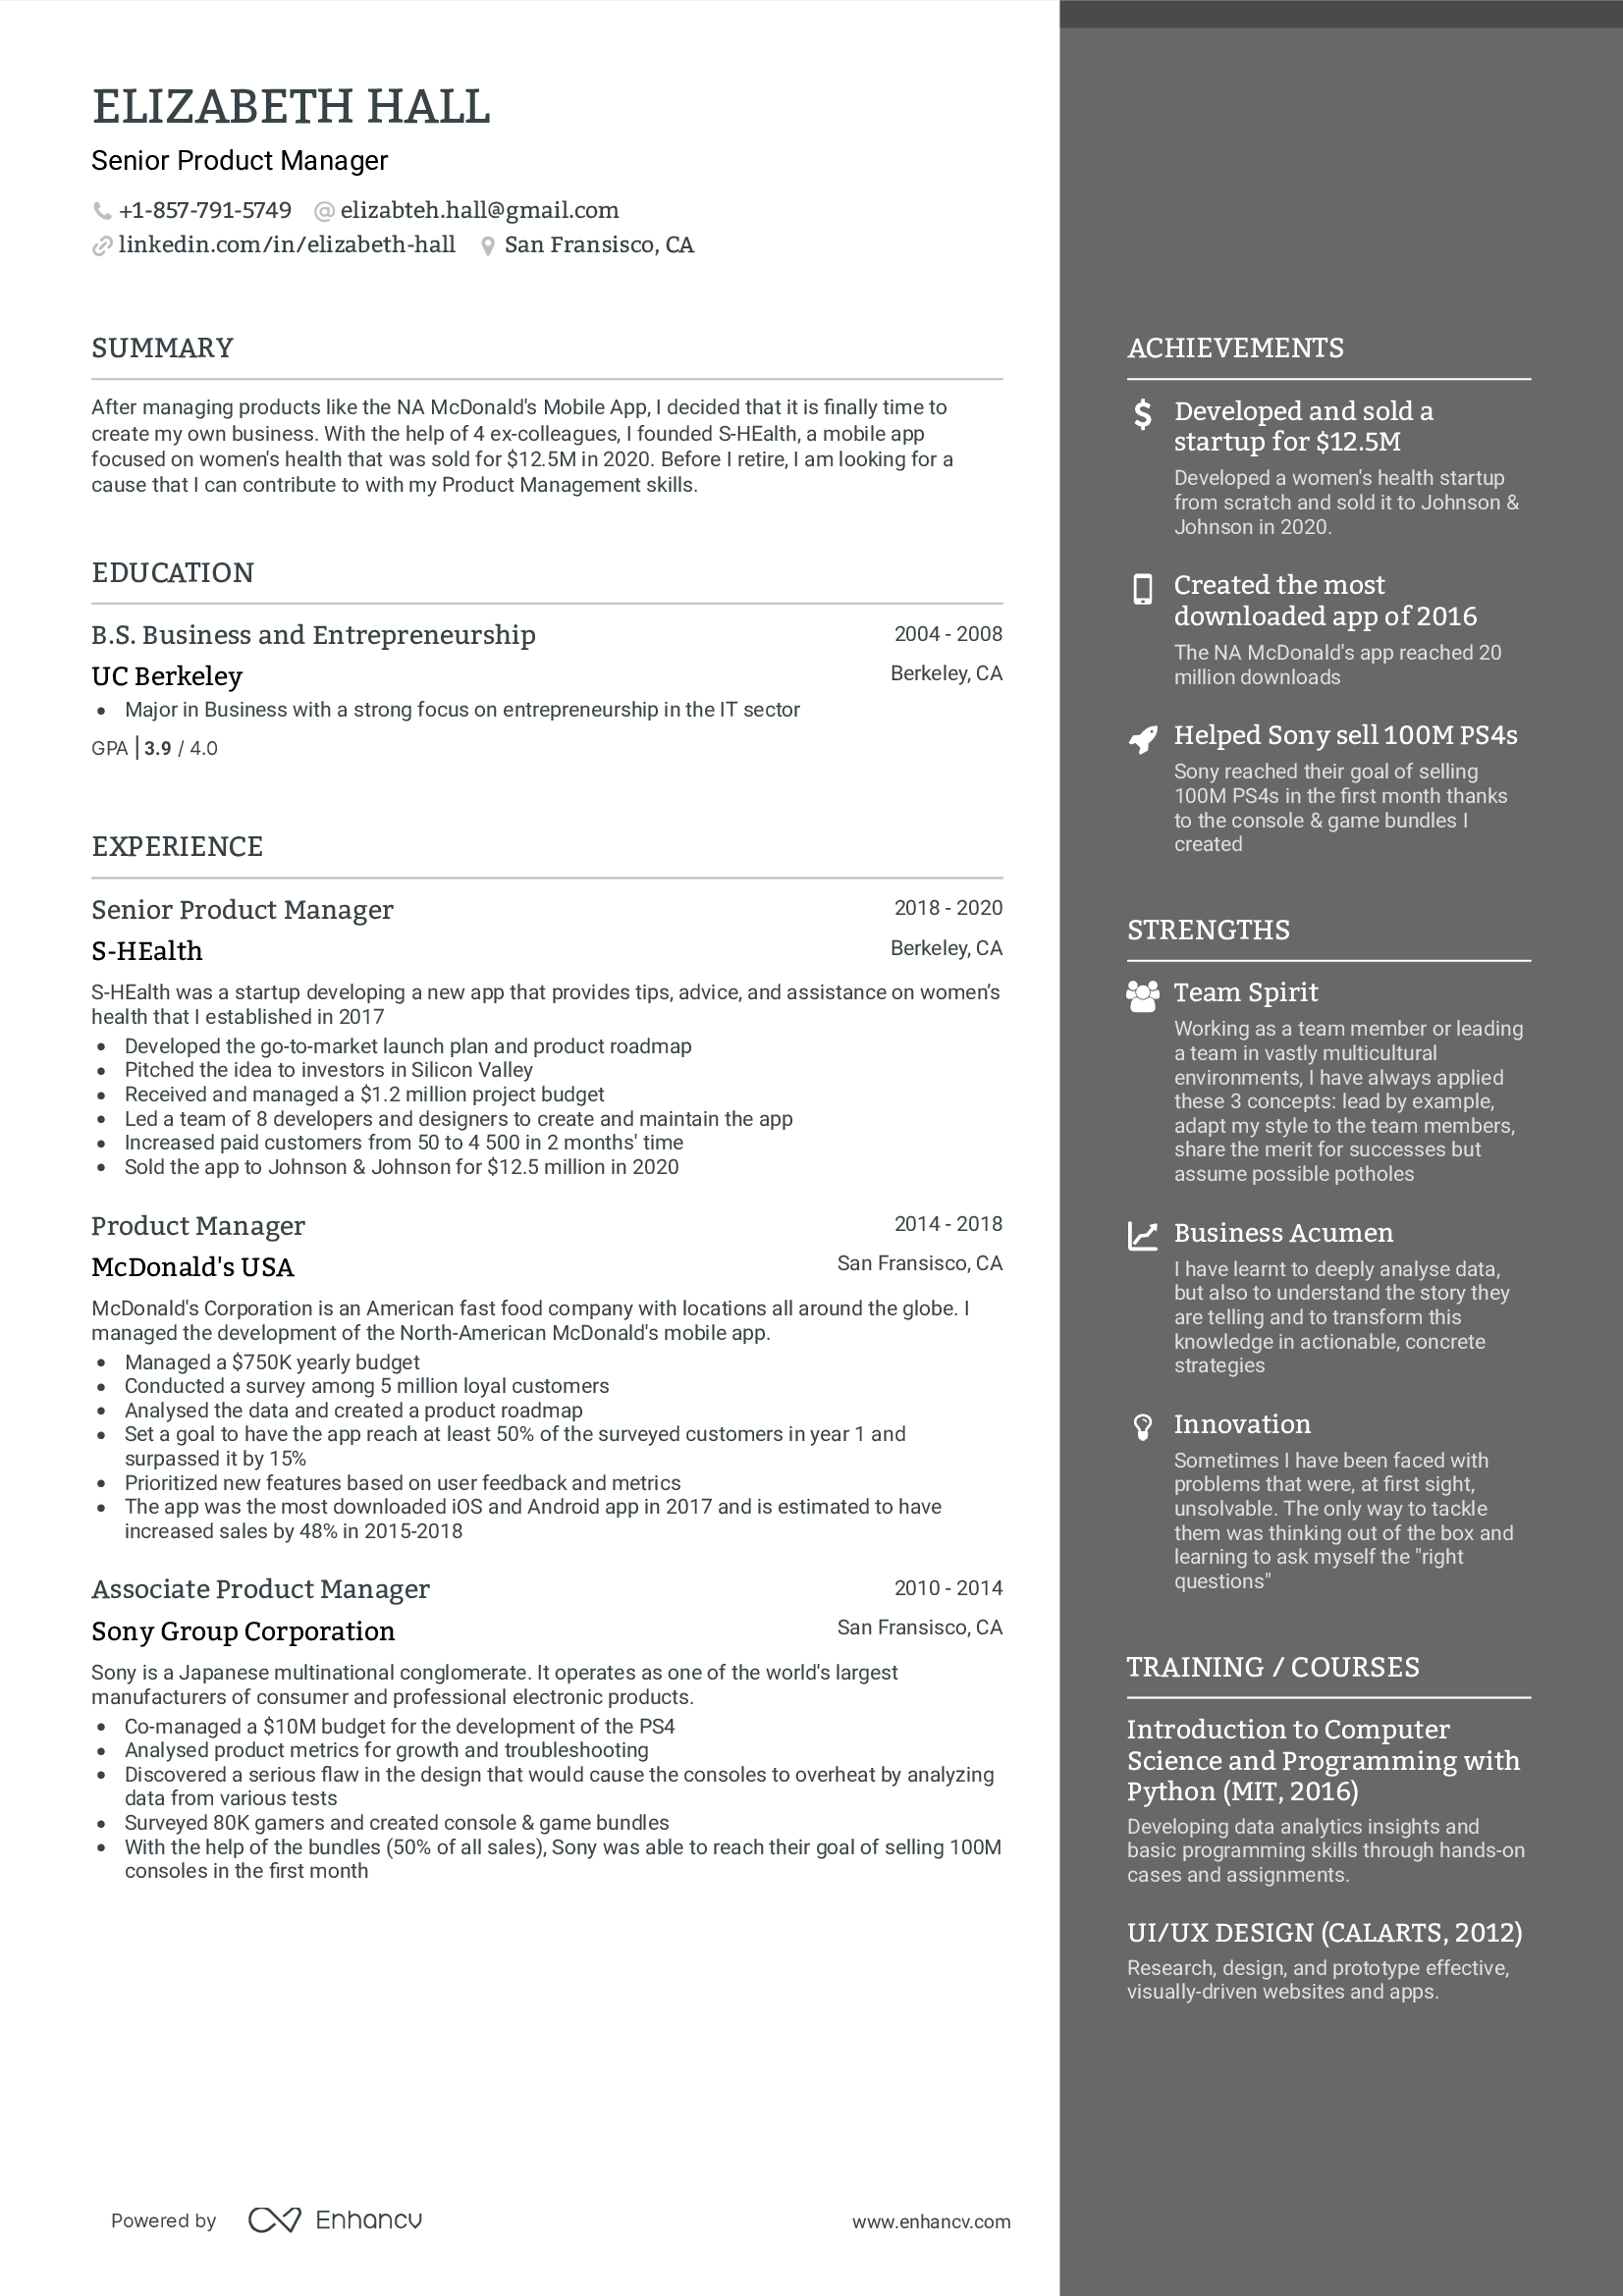 Senior Product Manager resume.png